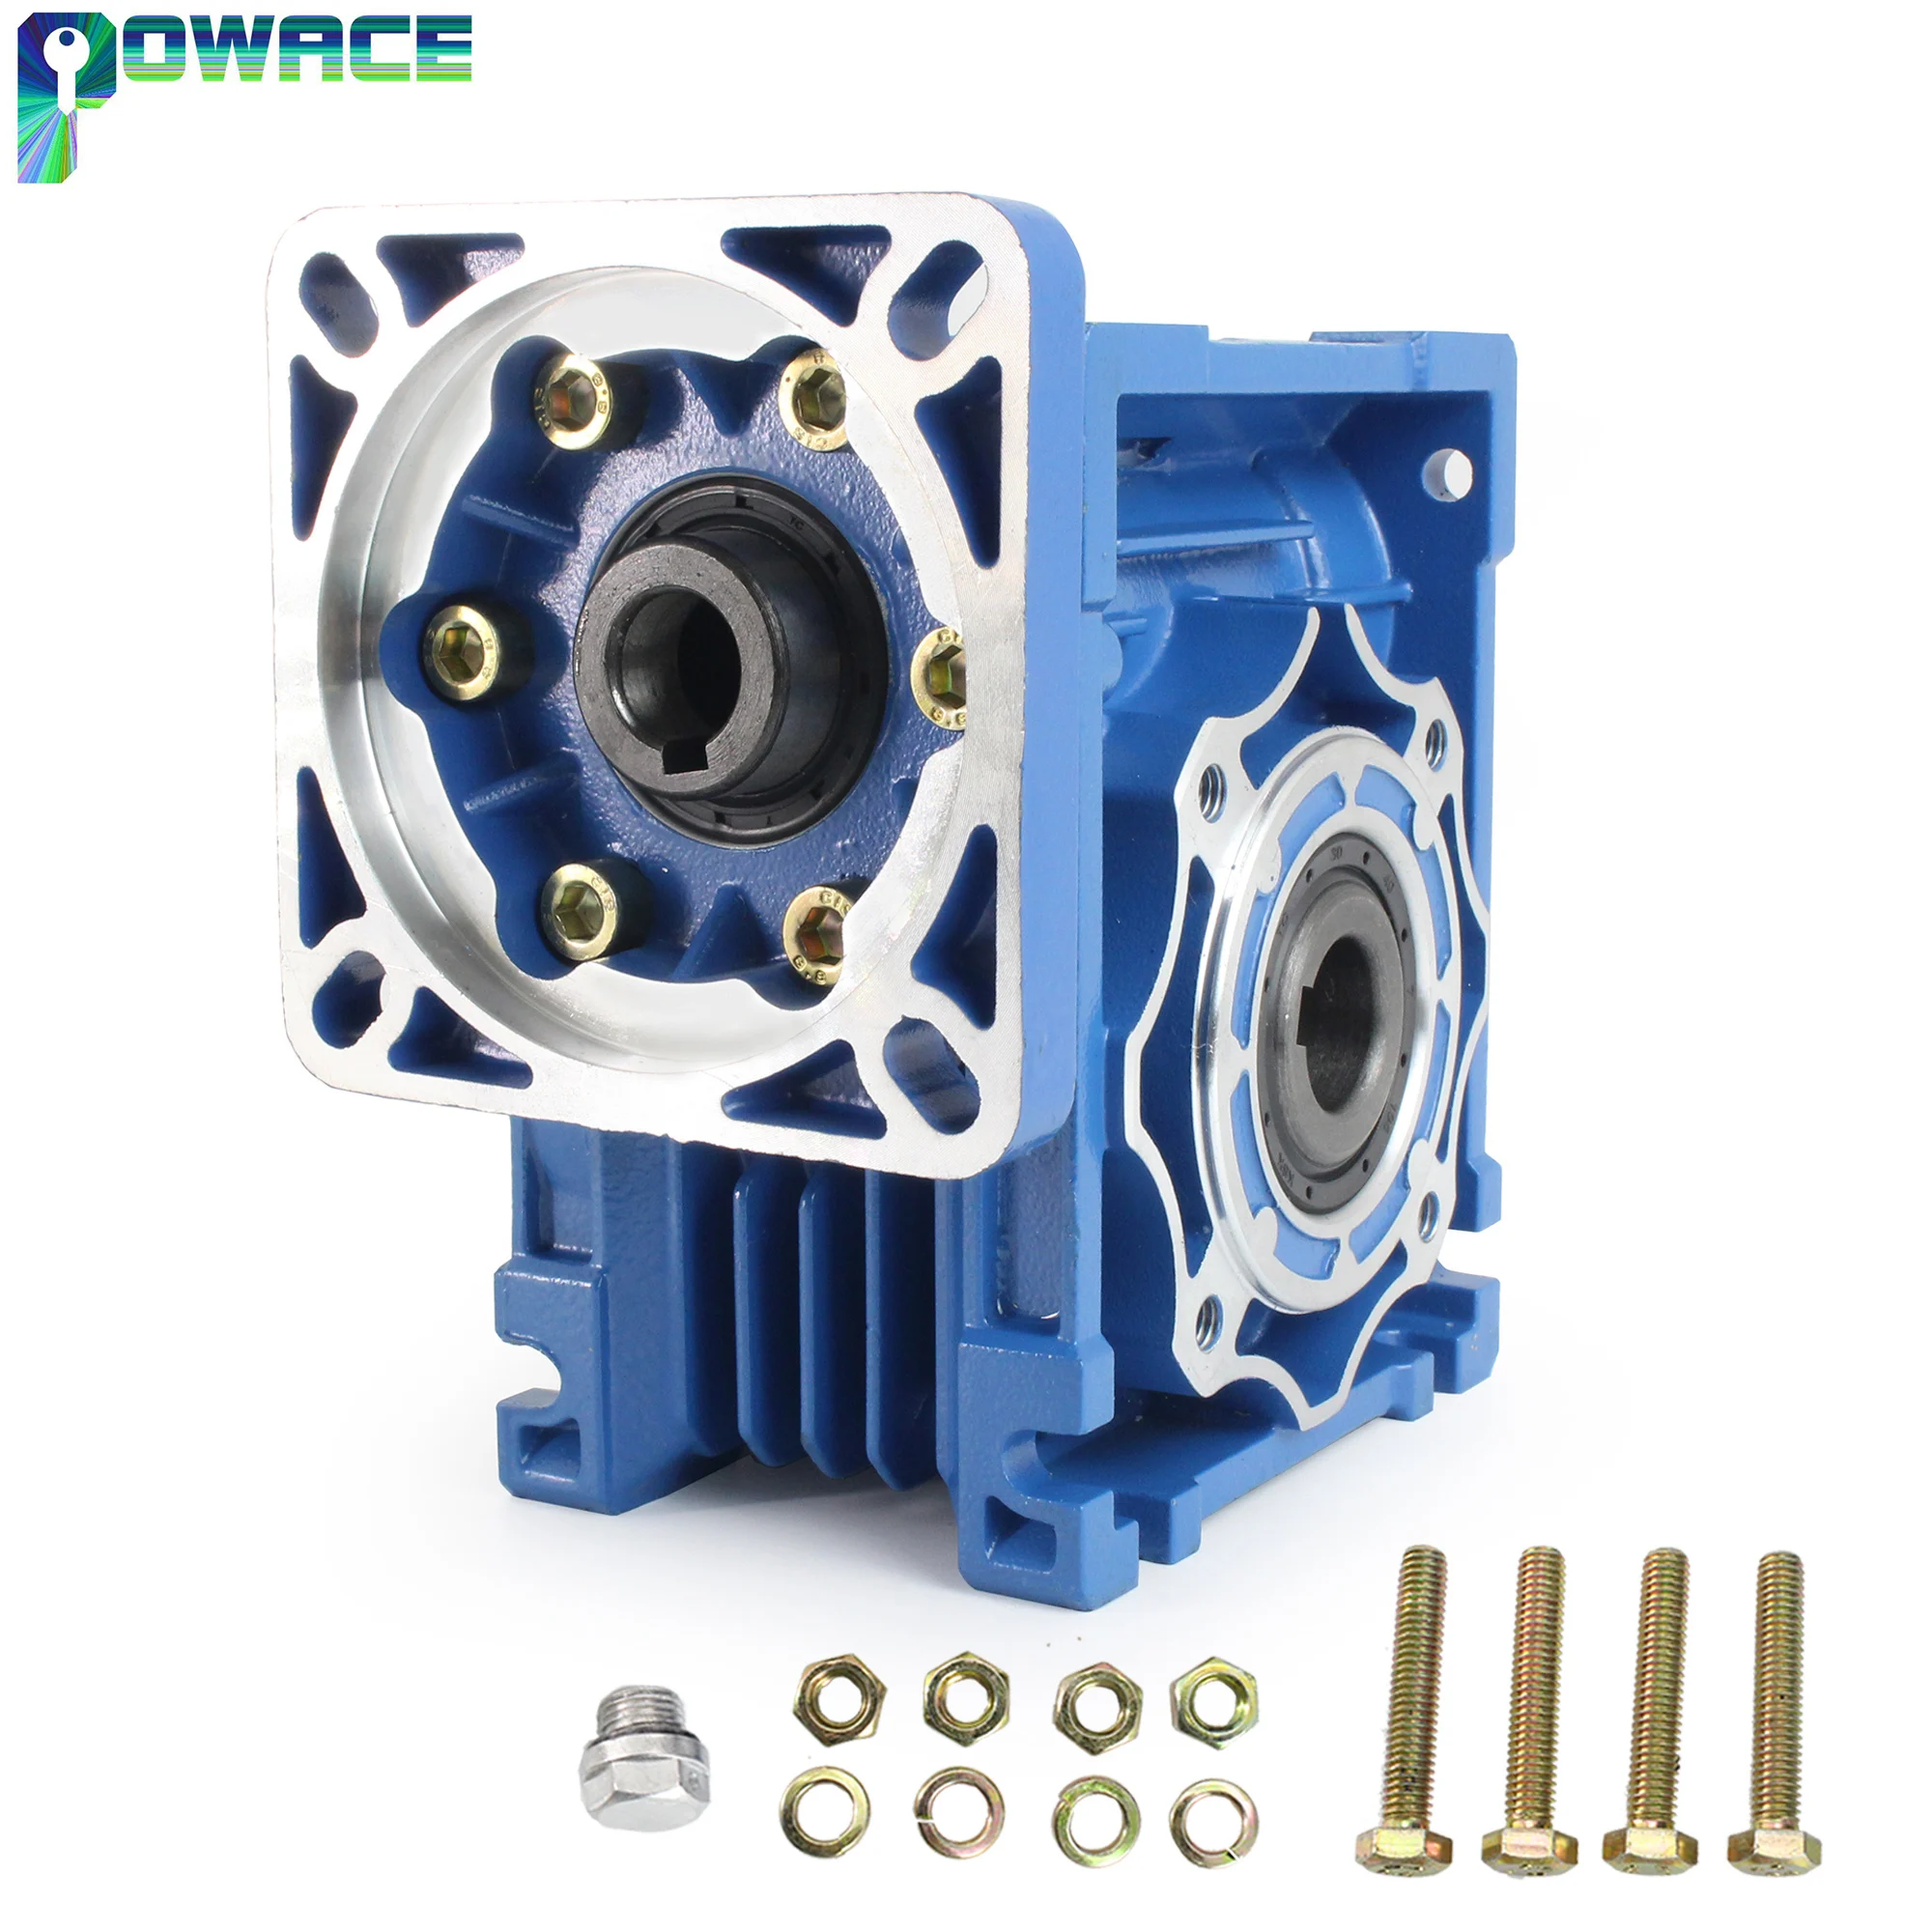 

NMRV050 Square Gearbox Worm Gear Reducer Ratio 5 to 100: 1 Input Shaft 14/19mm Input Holes 25mm Stepper Motor Reducer